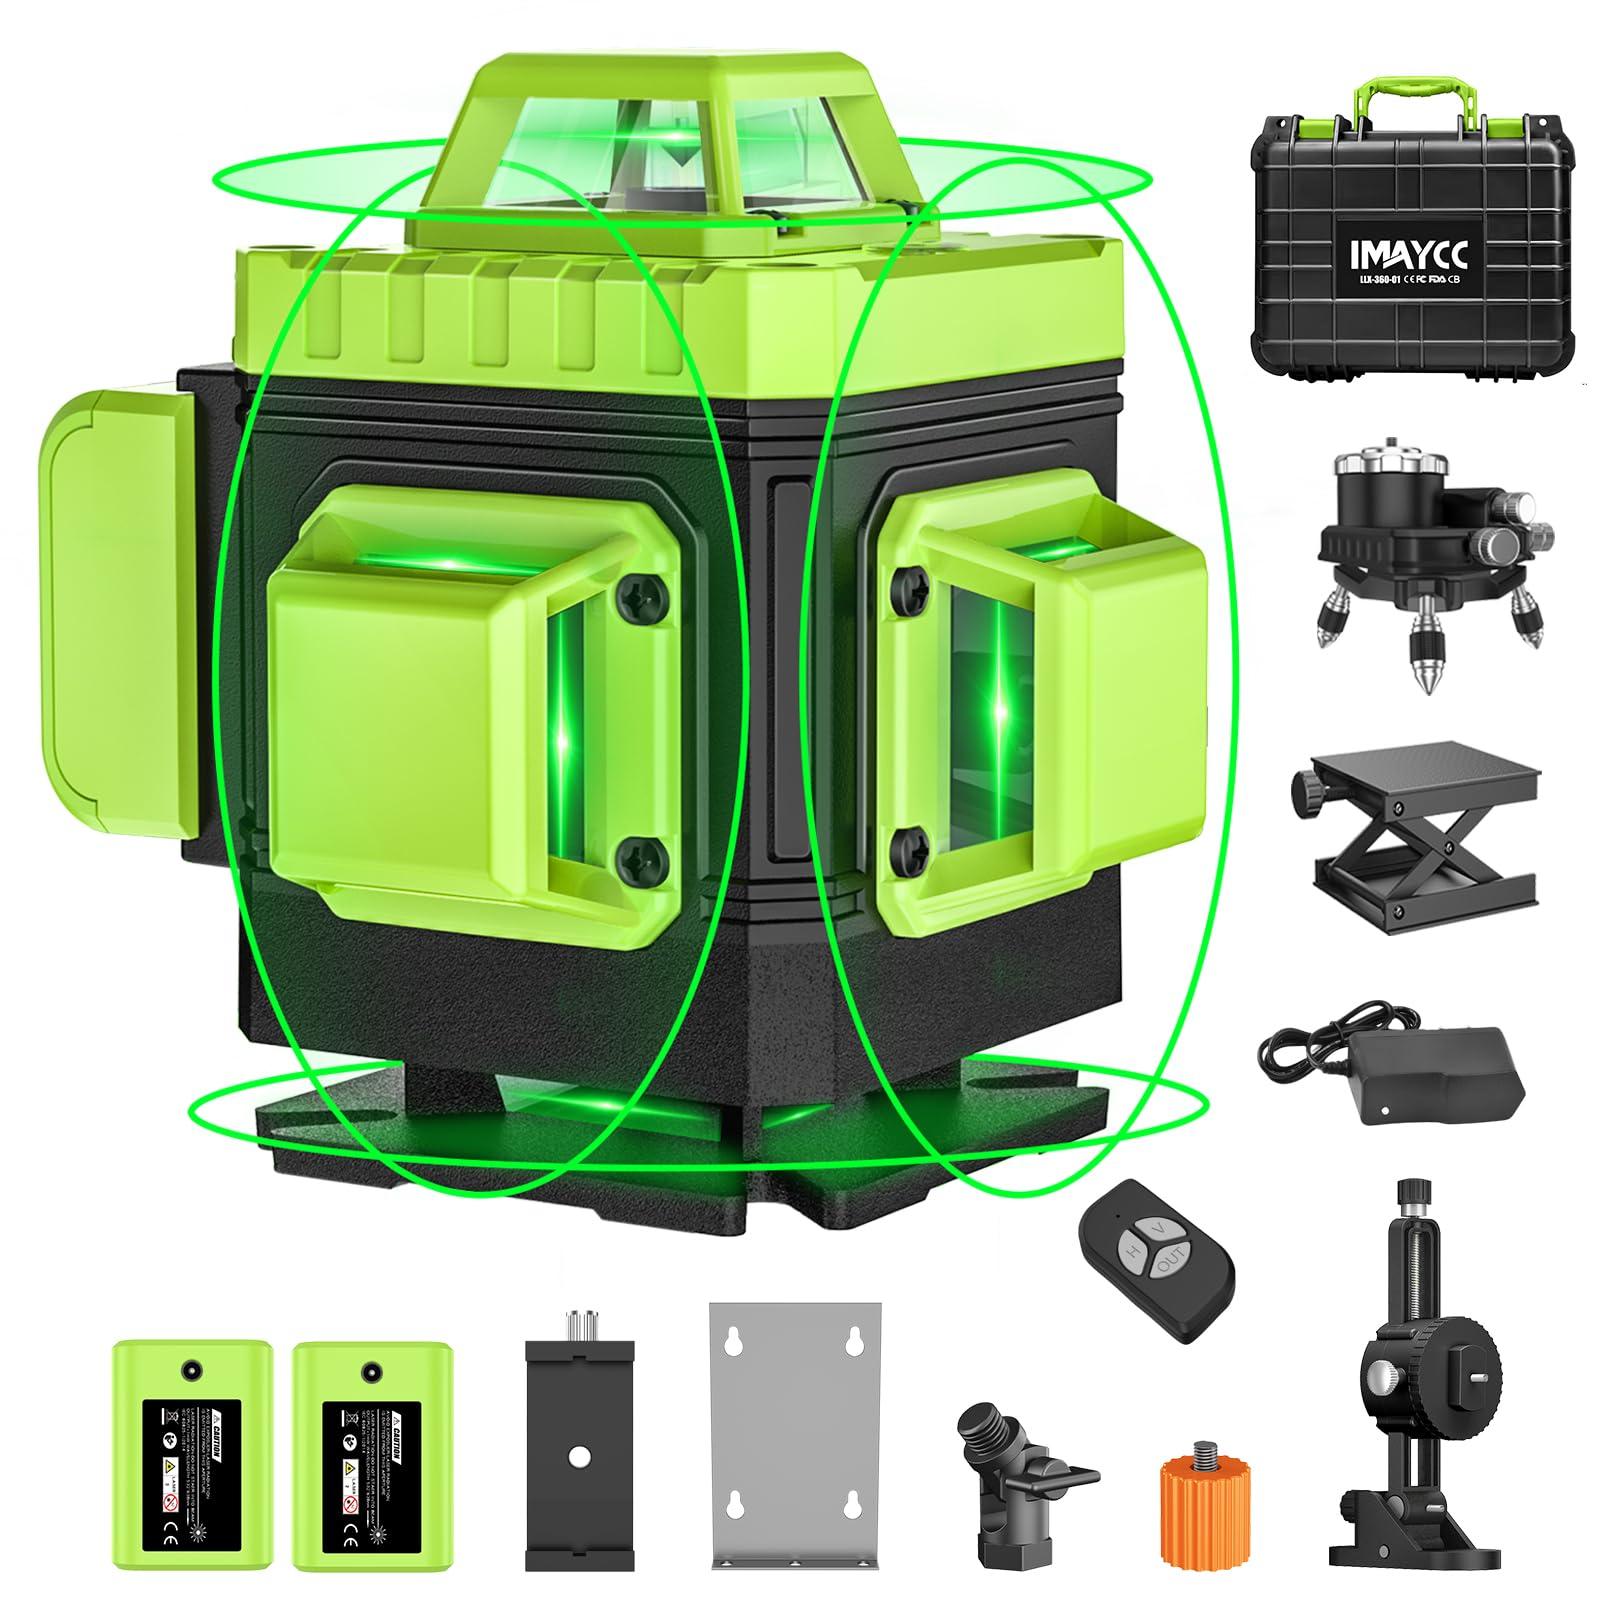 IMAYCC Laser Level Green Self Leveling 16 Lines 4x360°Adjustable Brightness Horizontal & Vertical Cross Line with Manual and Pulse Mode for Indoor Outdoor, 2xBattery,Remote Control,Charger and so on